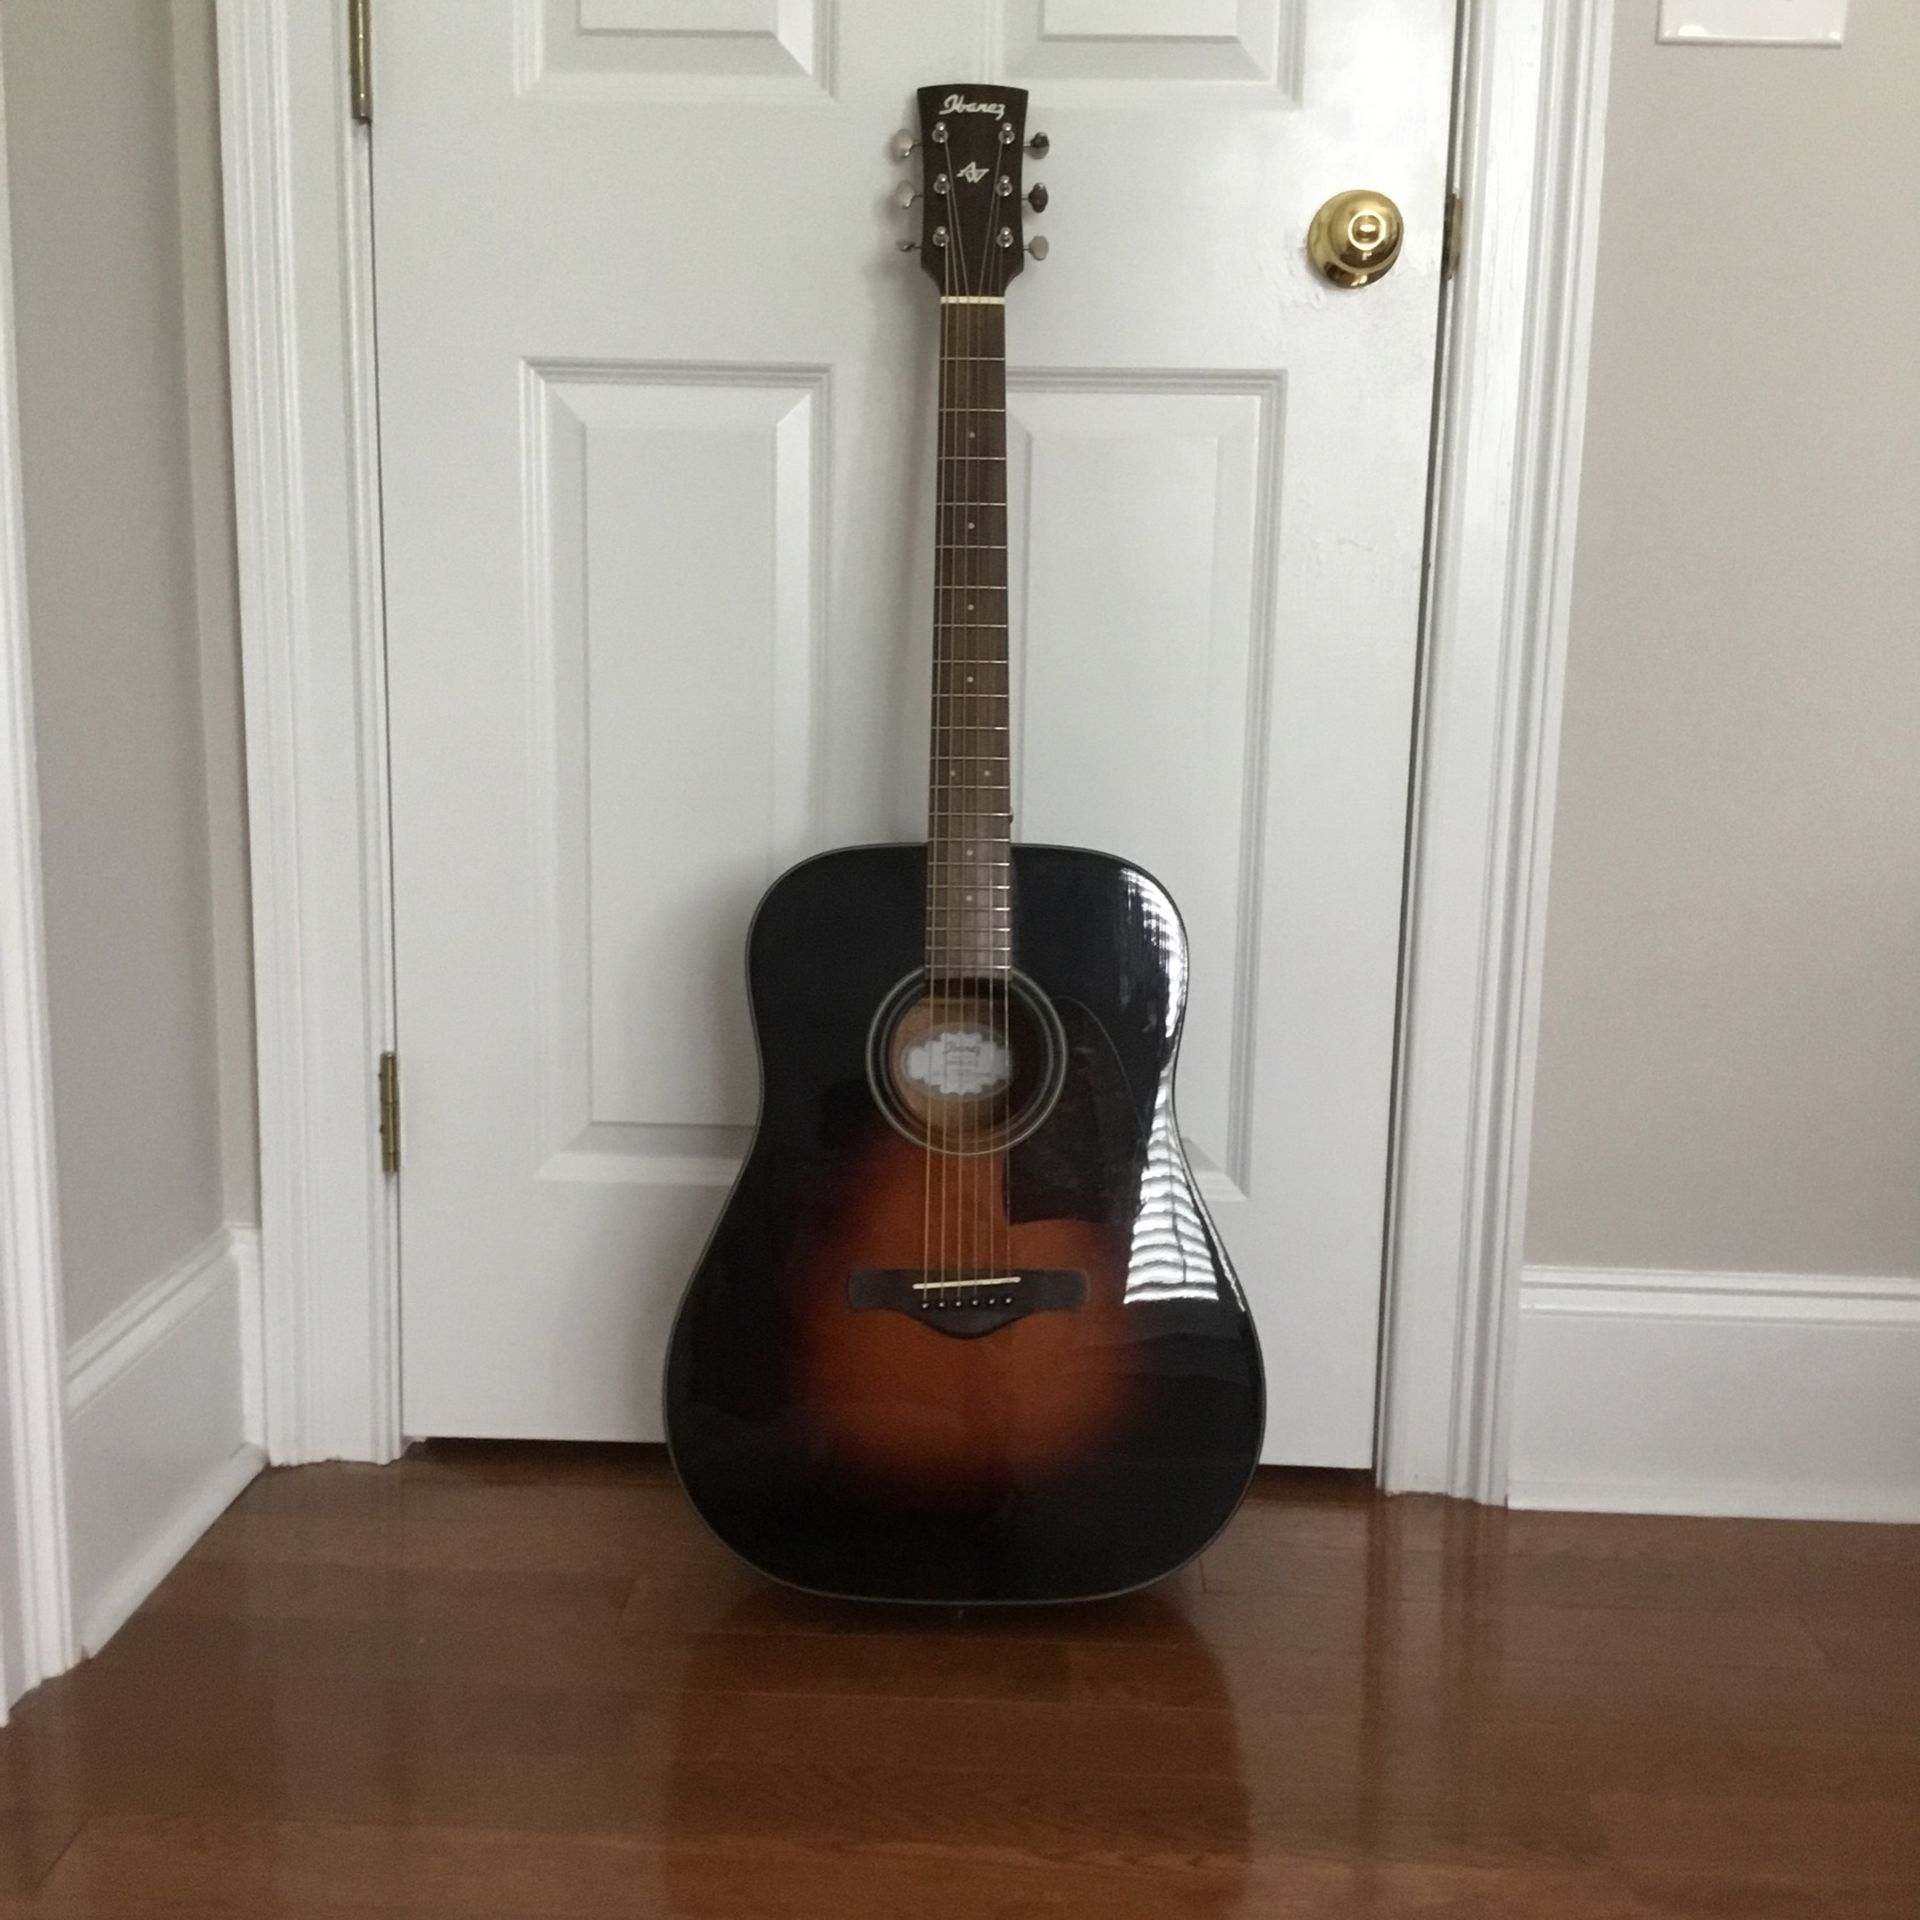 Ibanez AW400-BSG Acoustic Brown Guitar (Brown Sunburst Gloss Finish) With Pro-Lock Case & Sound Innovations Book; Cash Only, Northeast Richland County